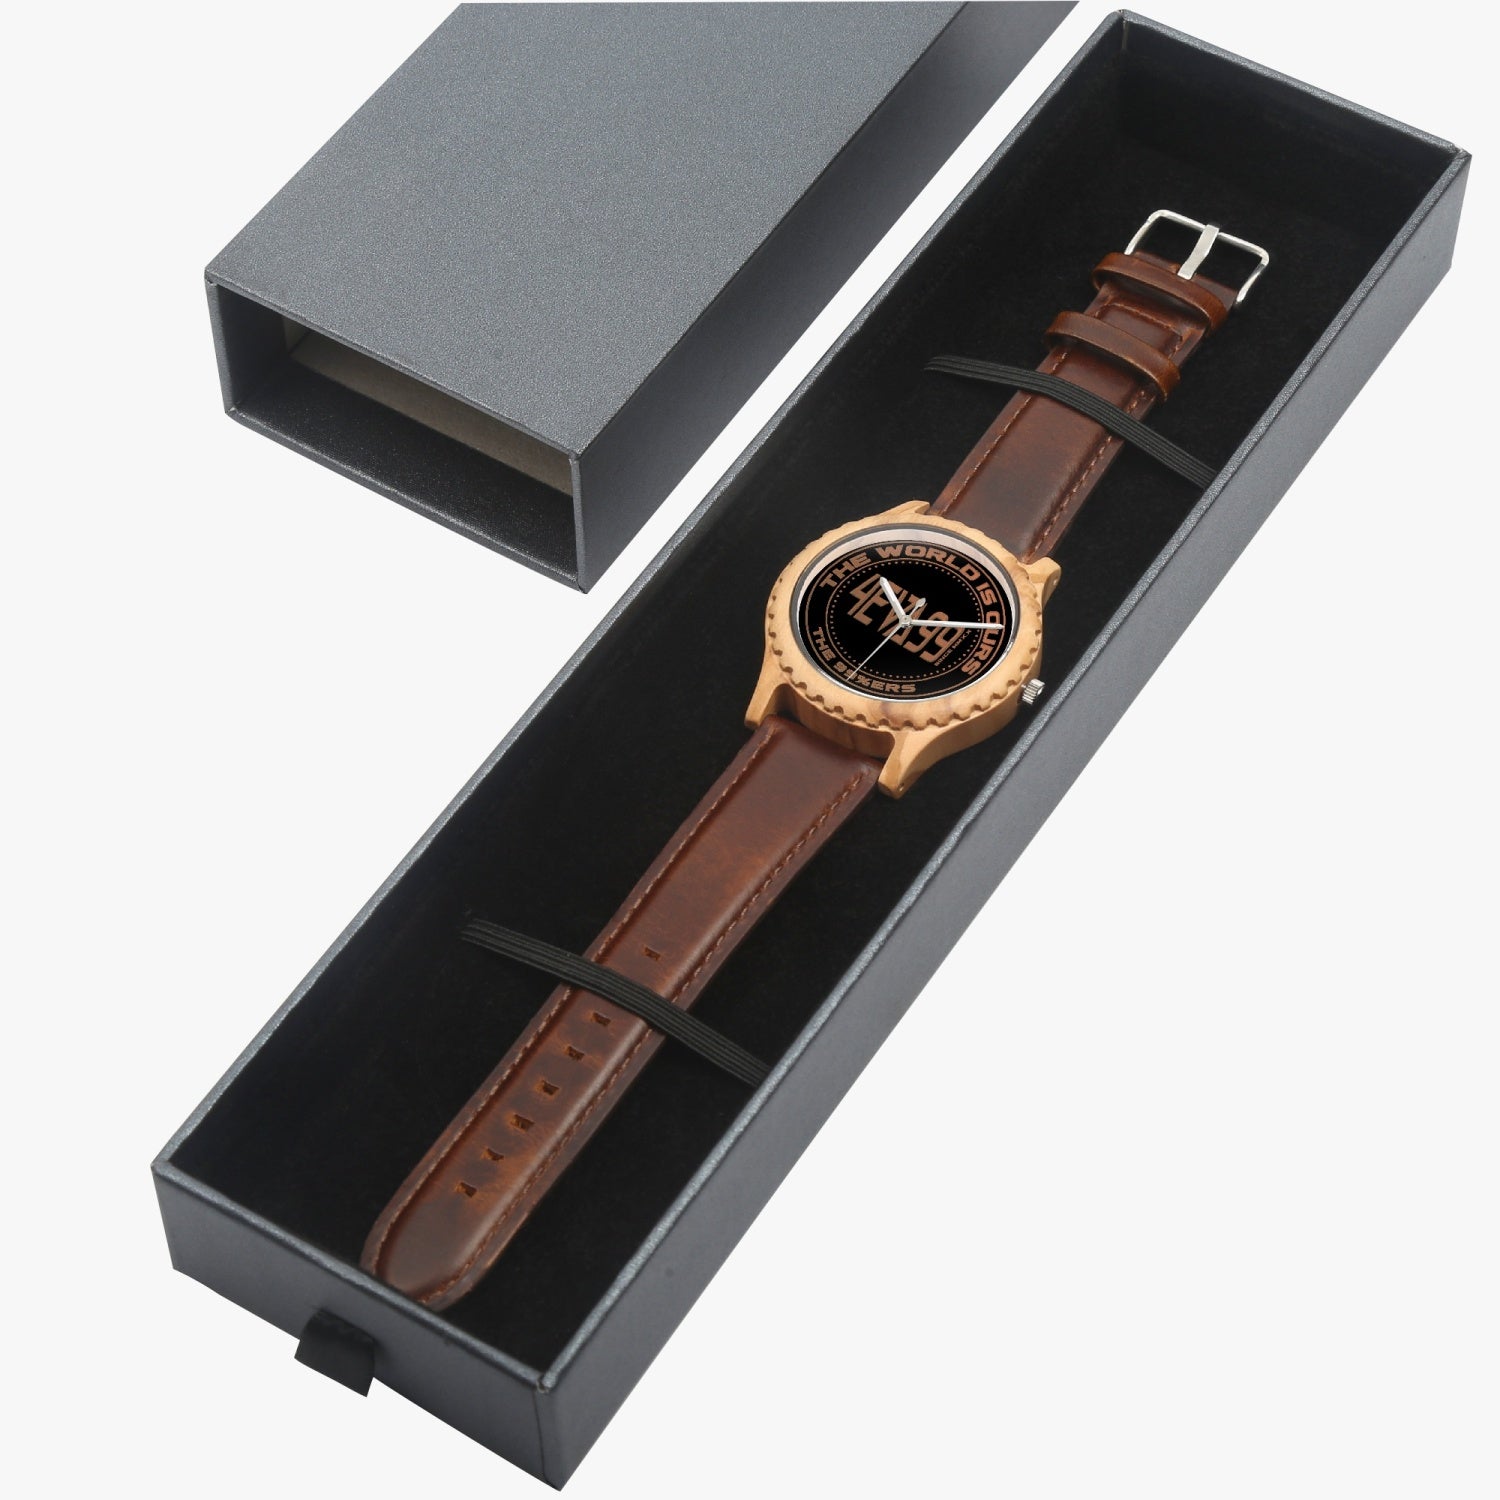 EMBLEM 205. Italian Olive Lumber Wooden Watch - Leather Strap